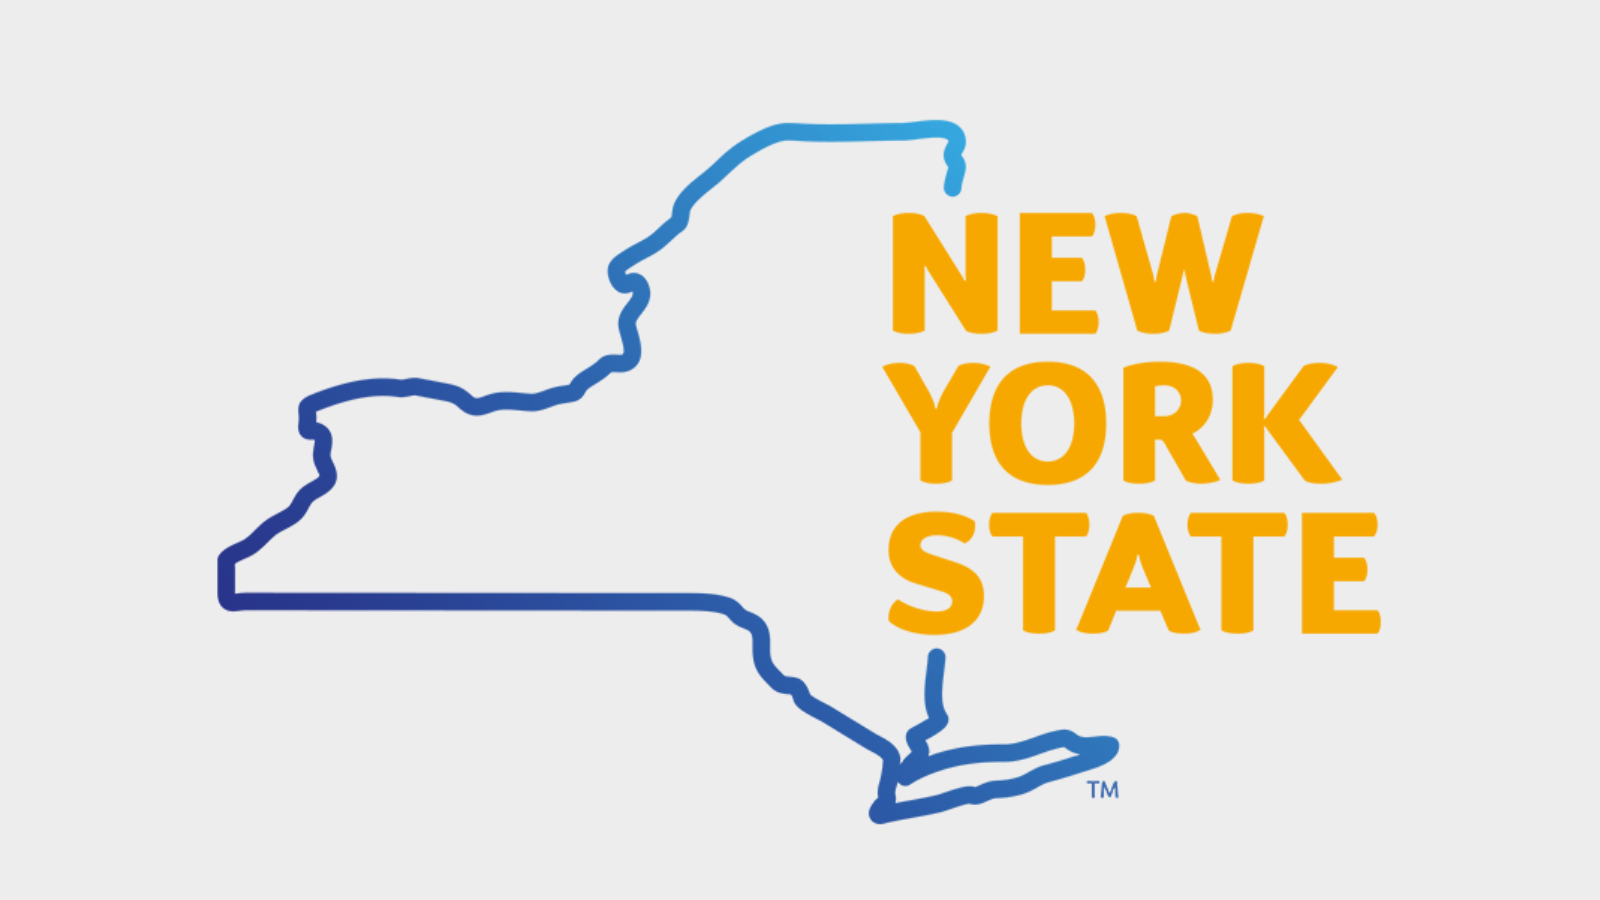 Governor Hochul Announces $150 Million New York Forward Loan Fund 2 to Provide Flexible Loans to New York State Small Businesses